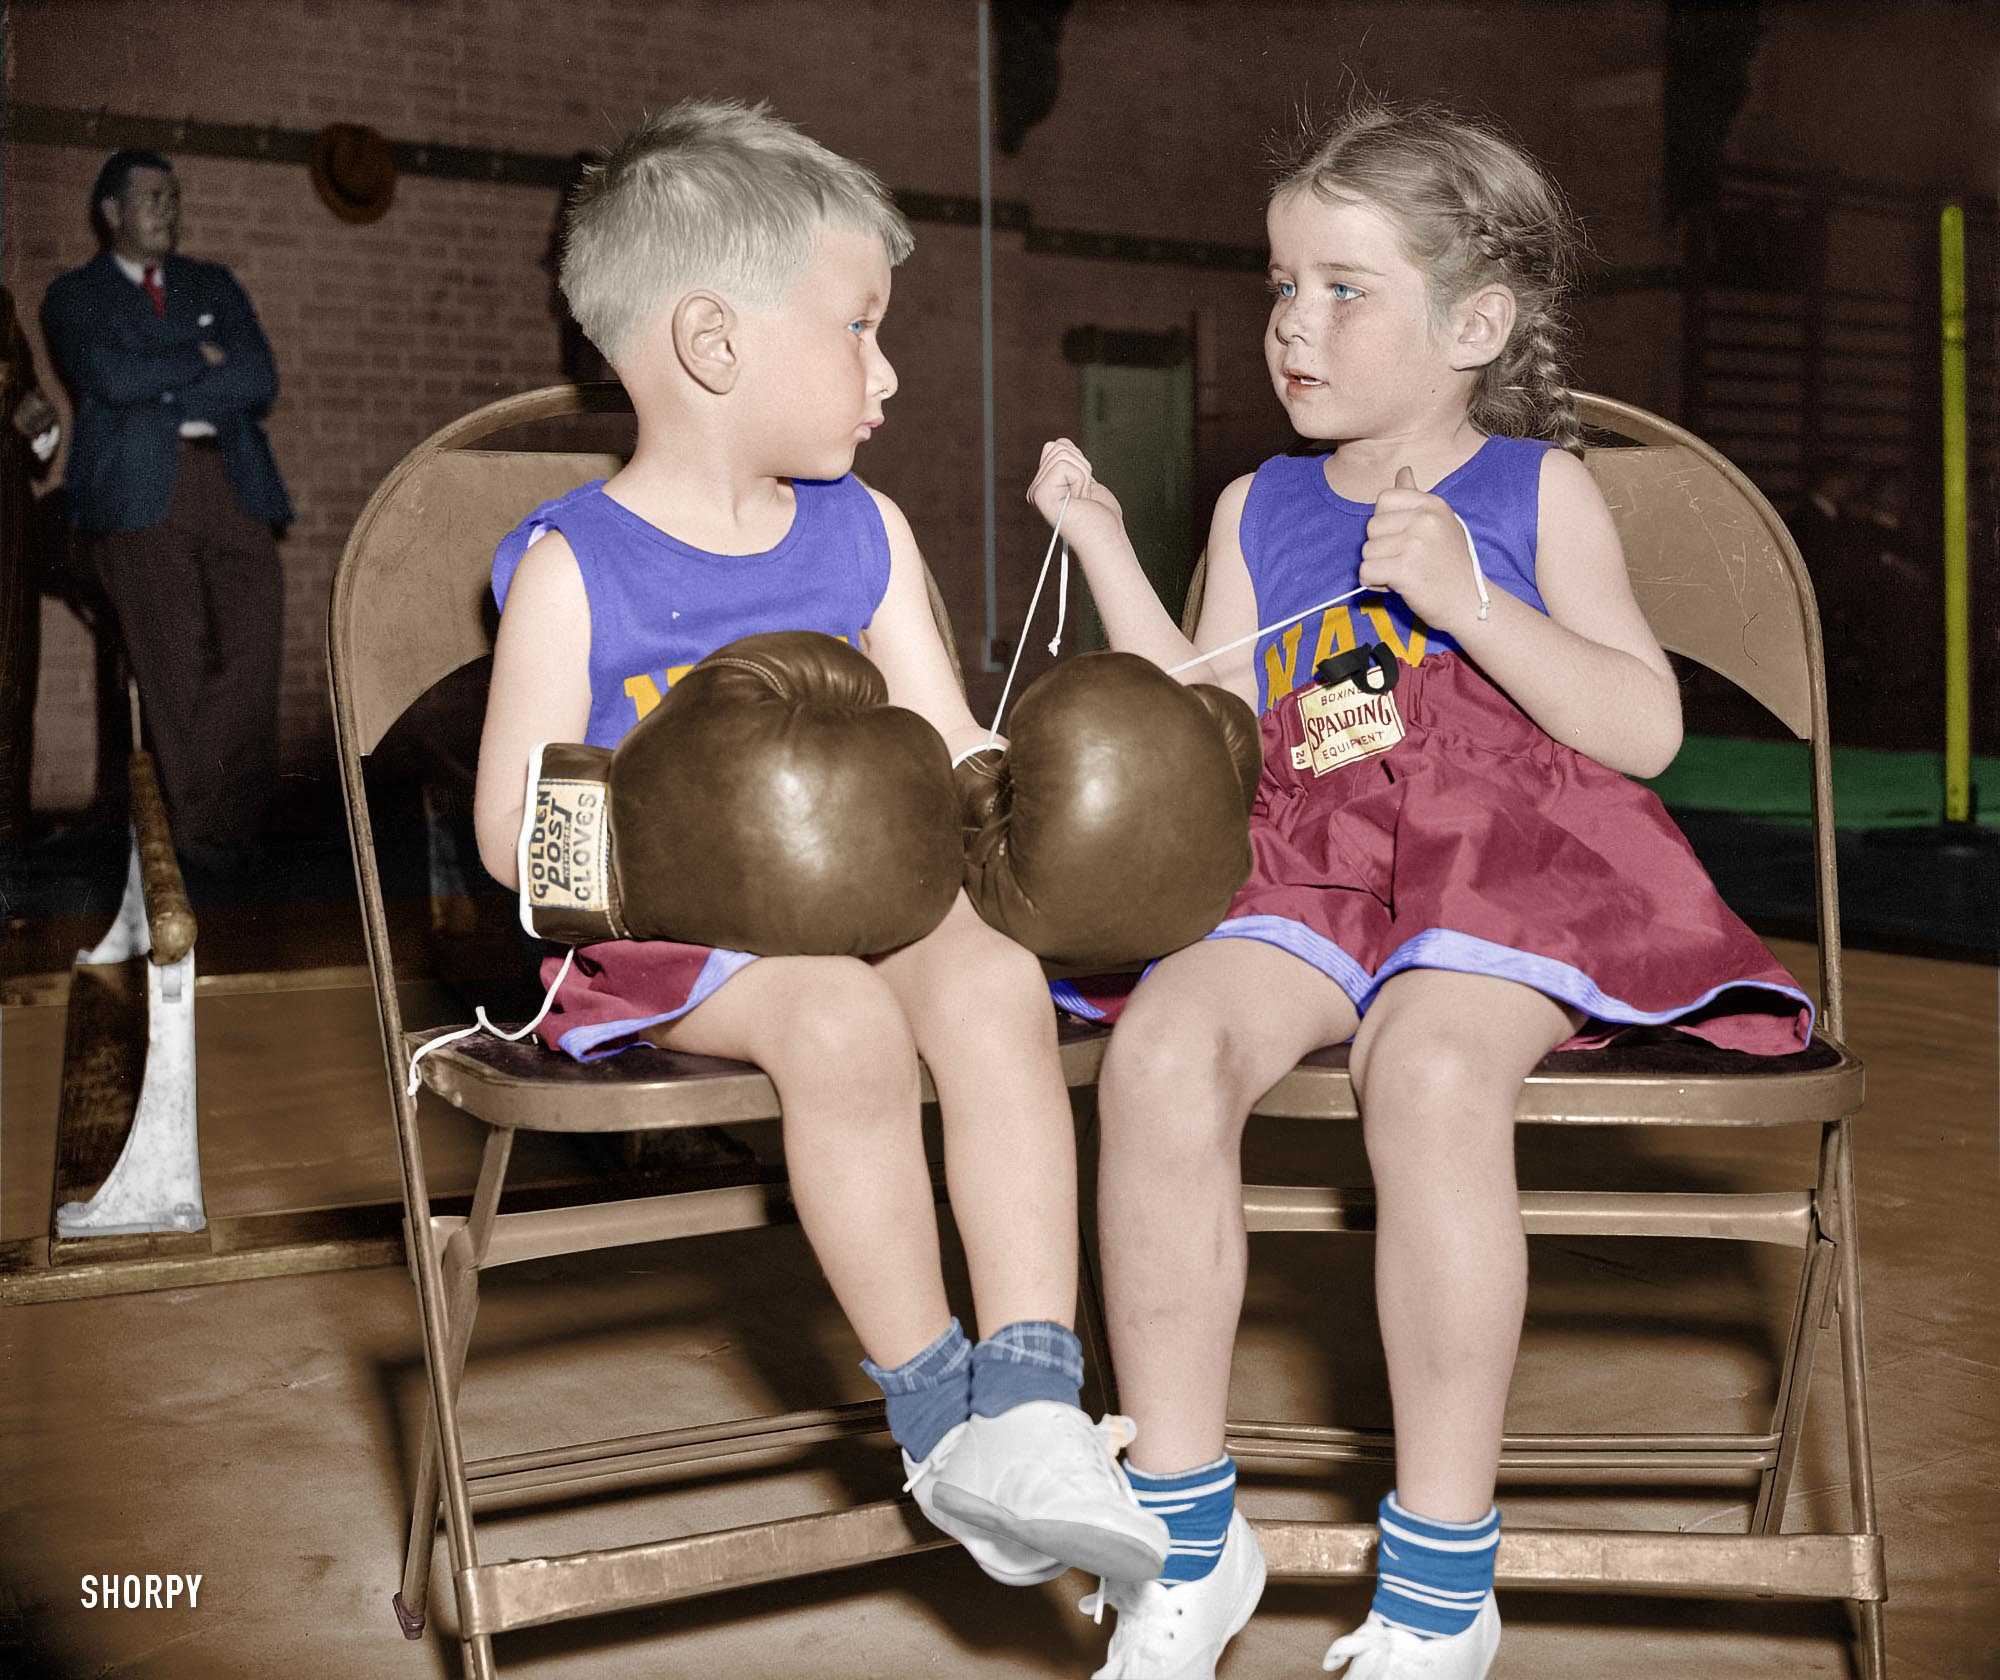 Colorized version of this Shorpy photo. Looks like this little guy may be having second thoughts.